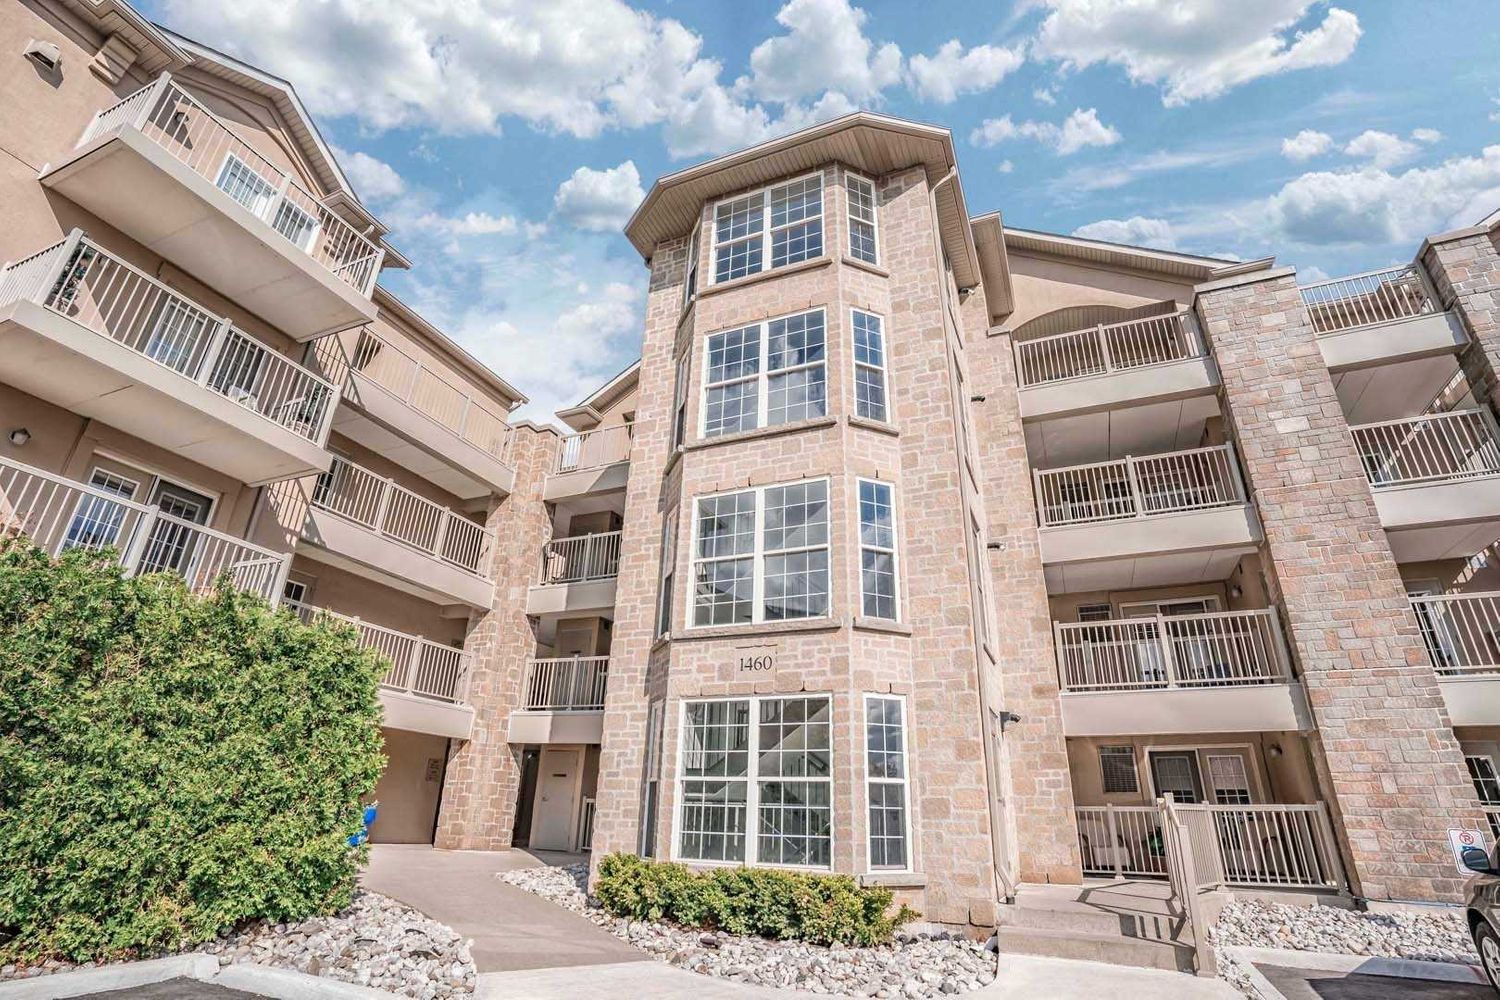 1460 Bishops Gate. Abbey Oakes IV Condos is located in  Oakville, Toronto - image #2 of 2